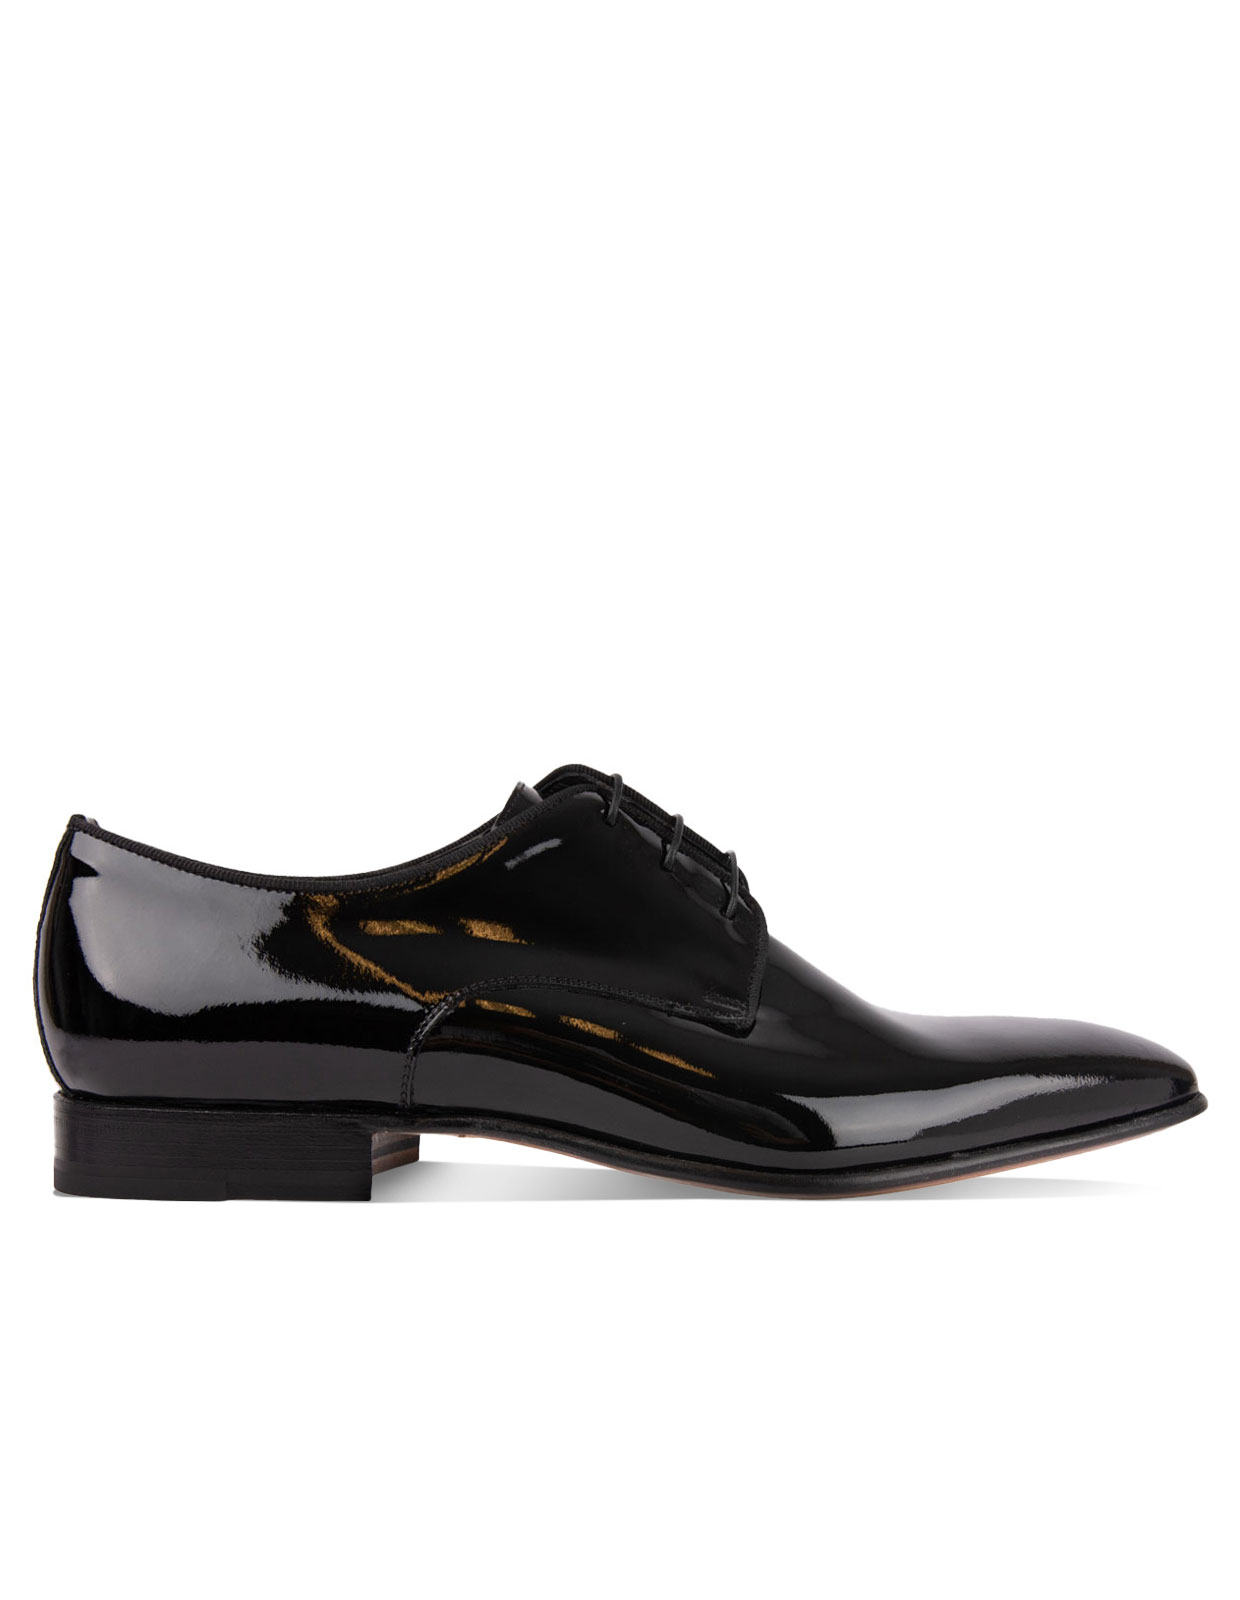 Lille Patent Leather Derby Shoes Black Stl 10